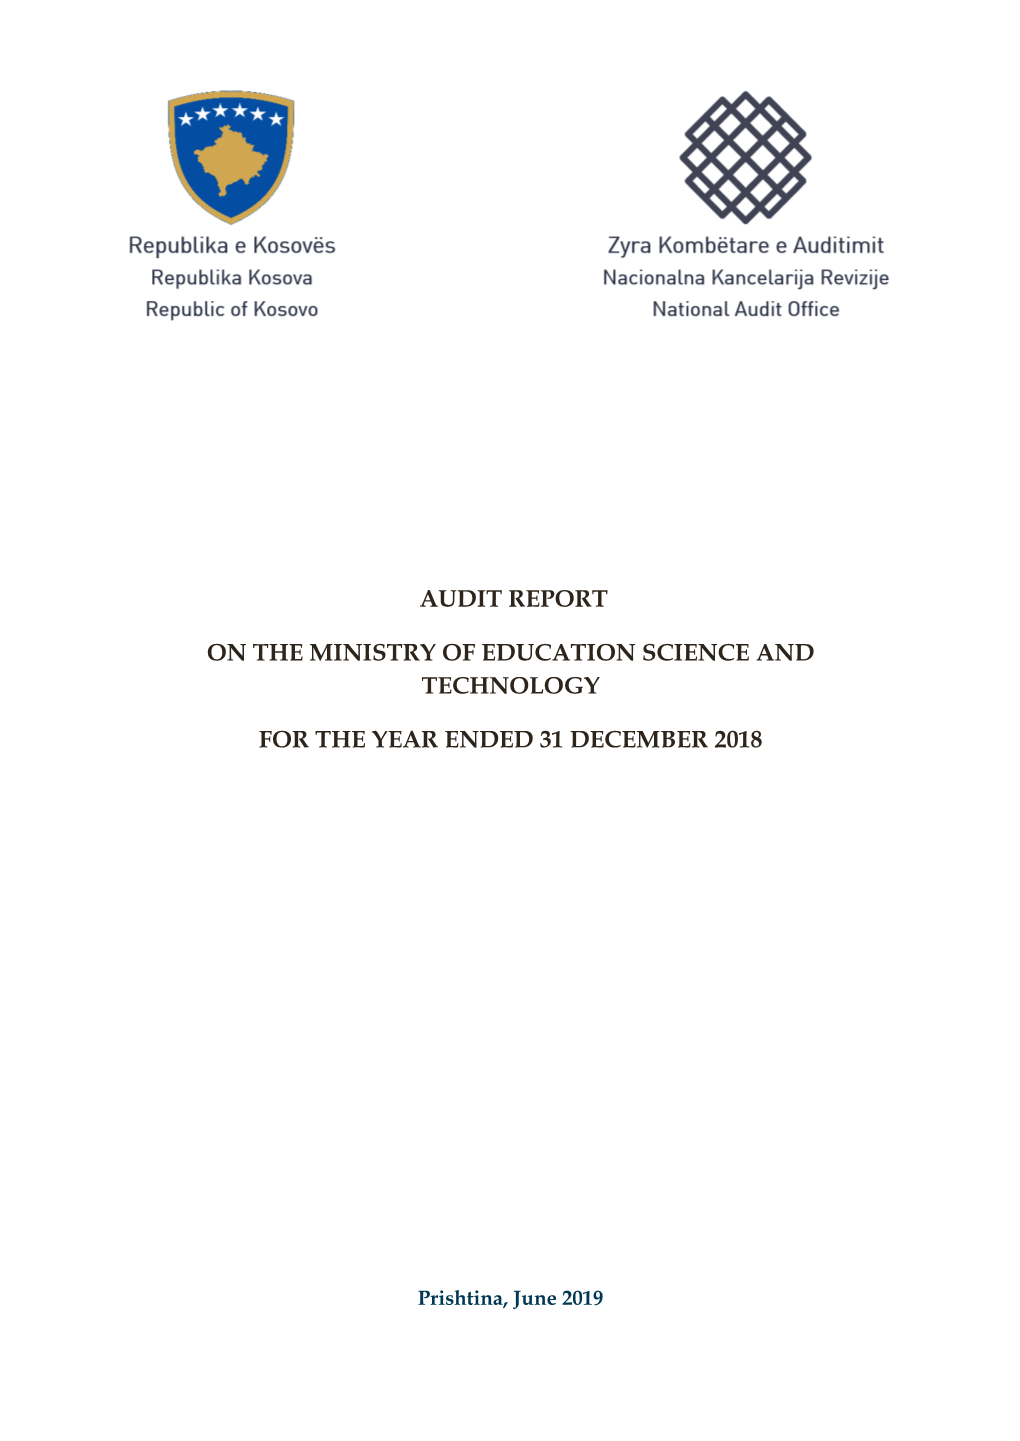 Audit Report on the Ministry of Education Science and Technology